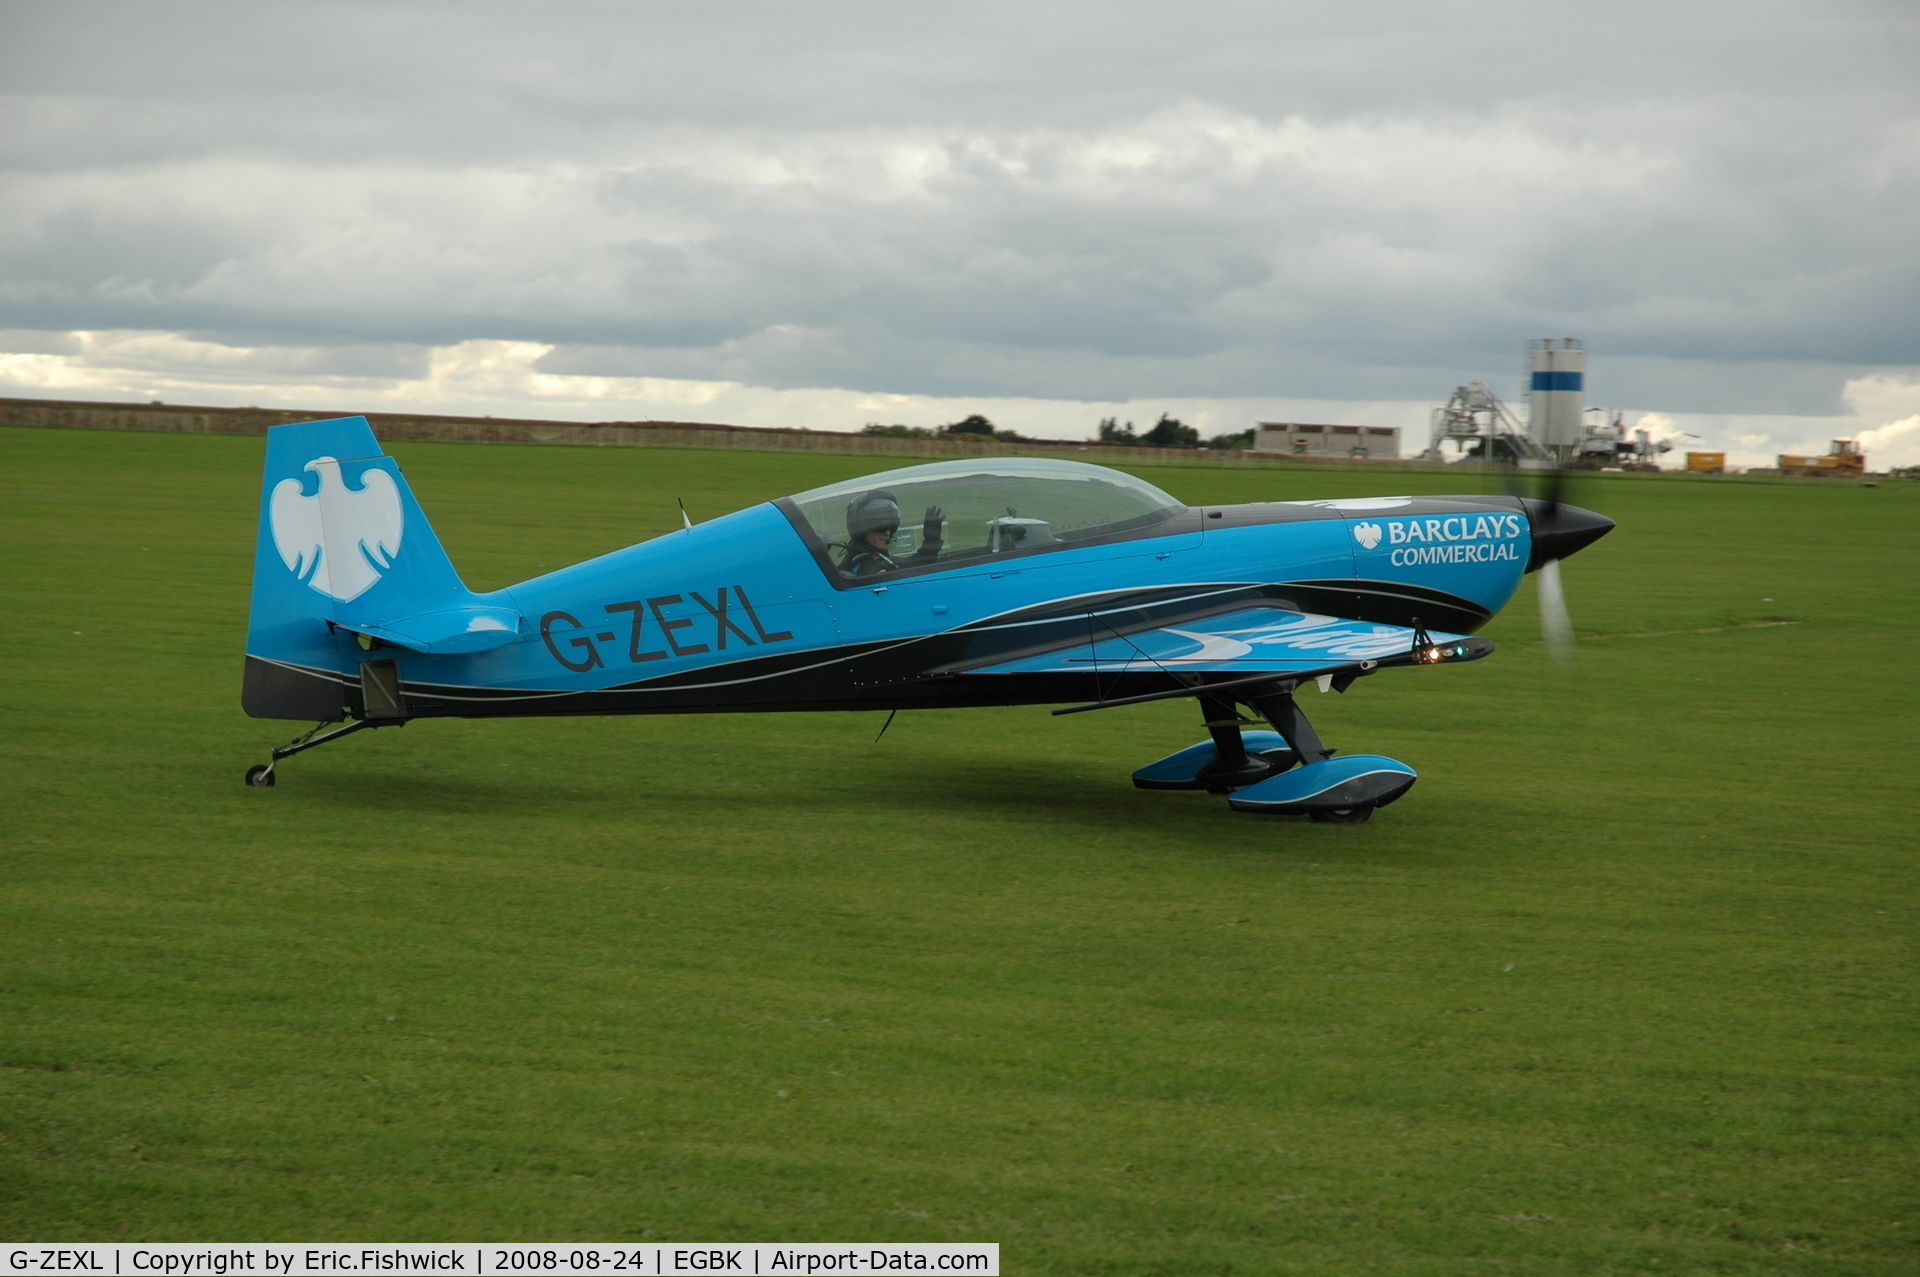 G-ZEXL, 2006 Extra EA-300L C/N 1225, 2. G-ZEXL at Sywell Airshow 24 Aug 2008